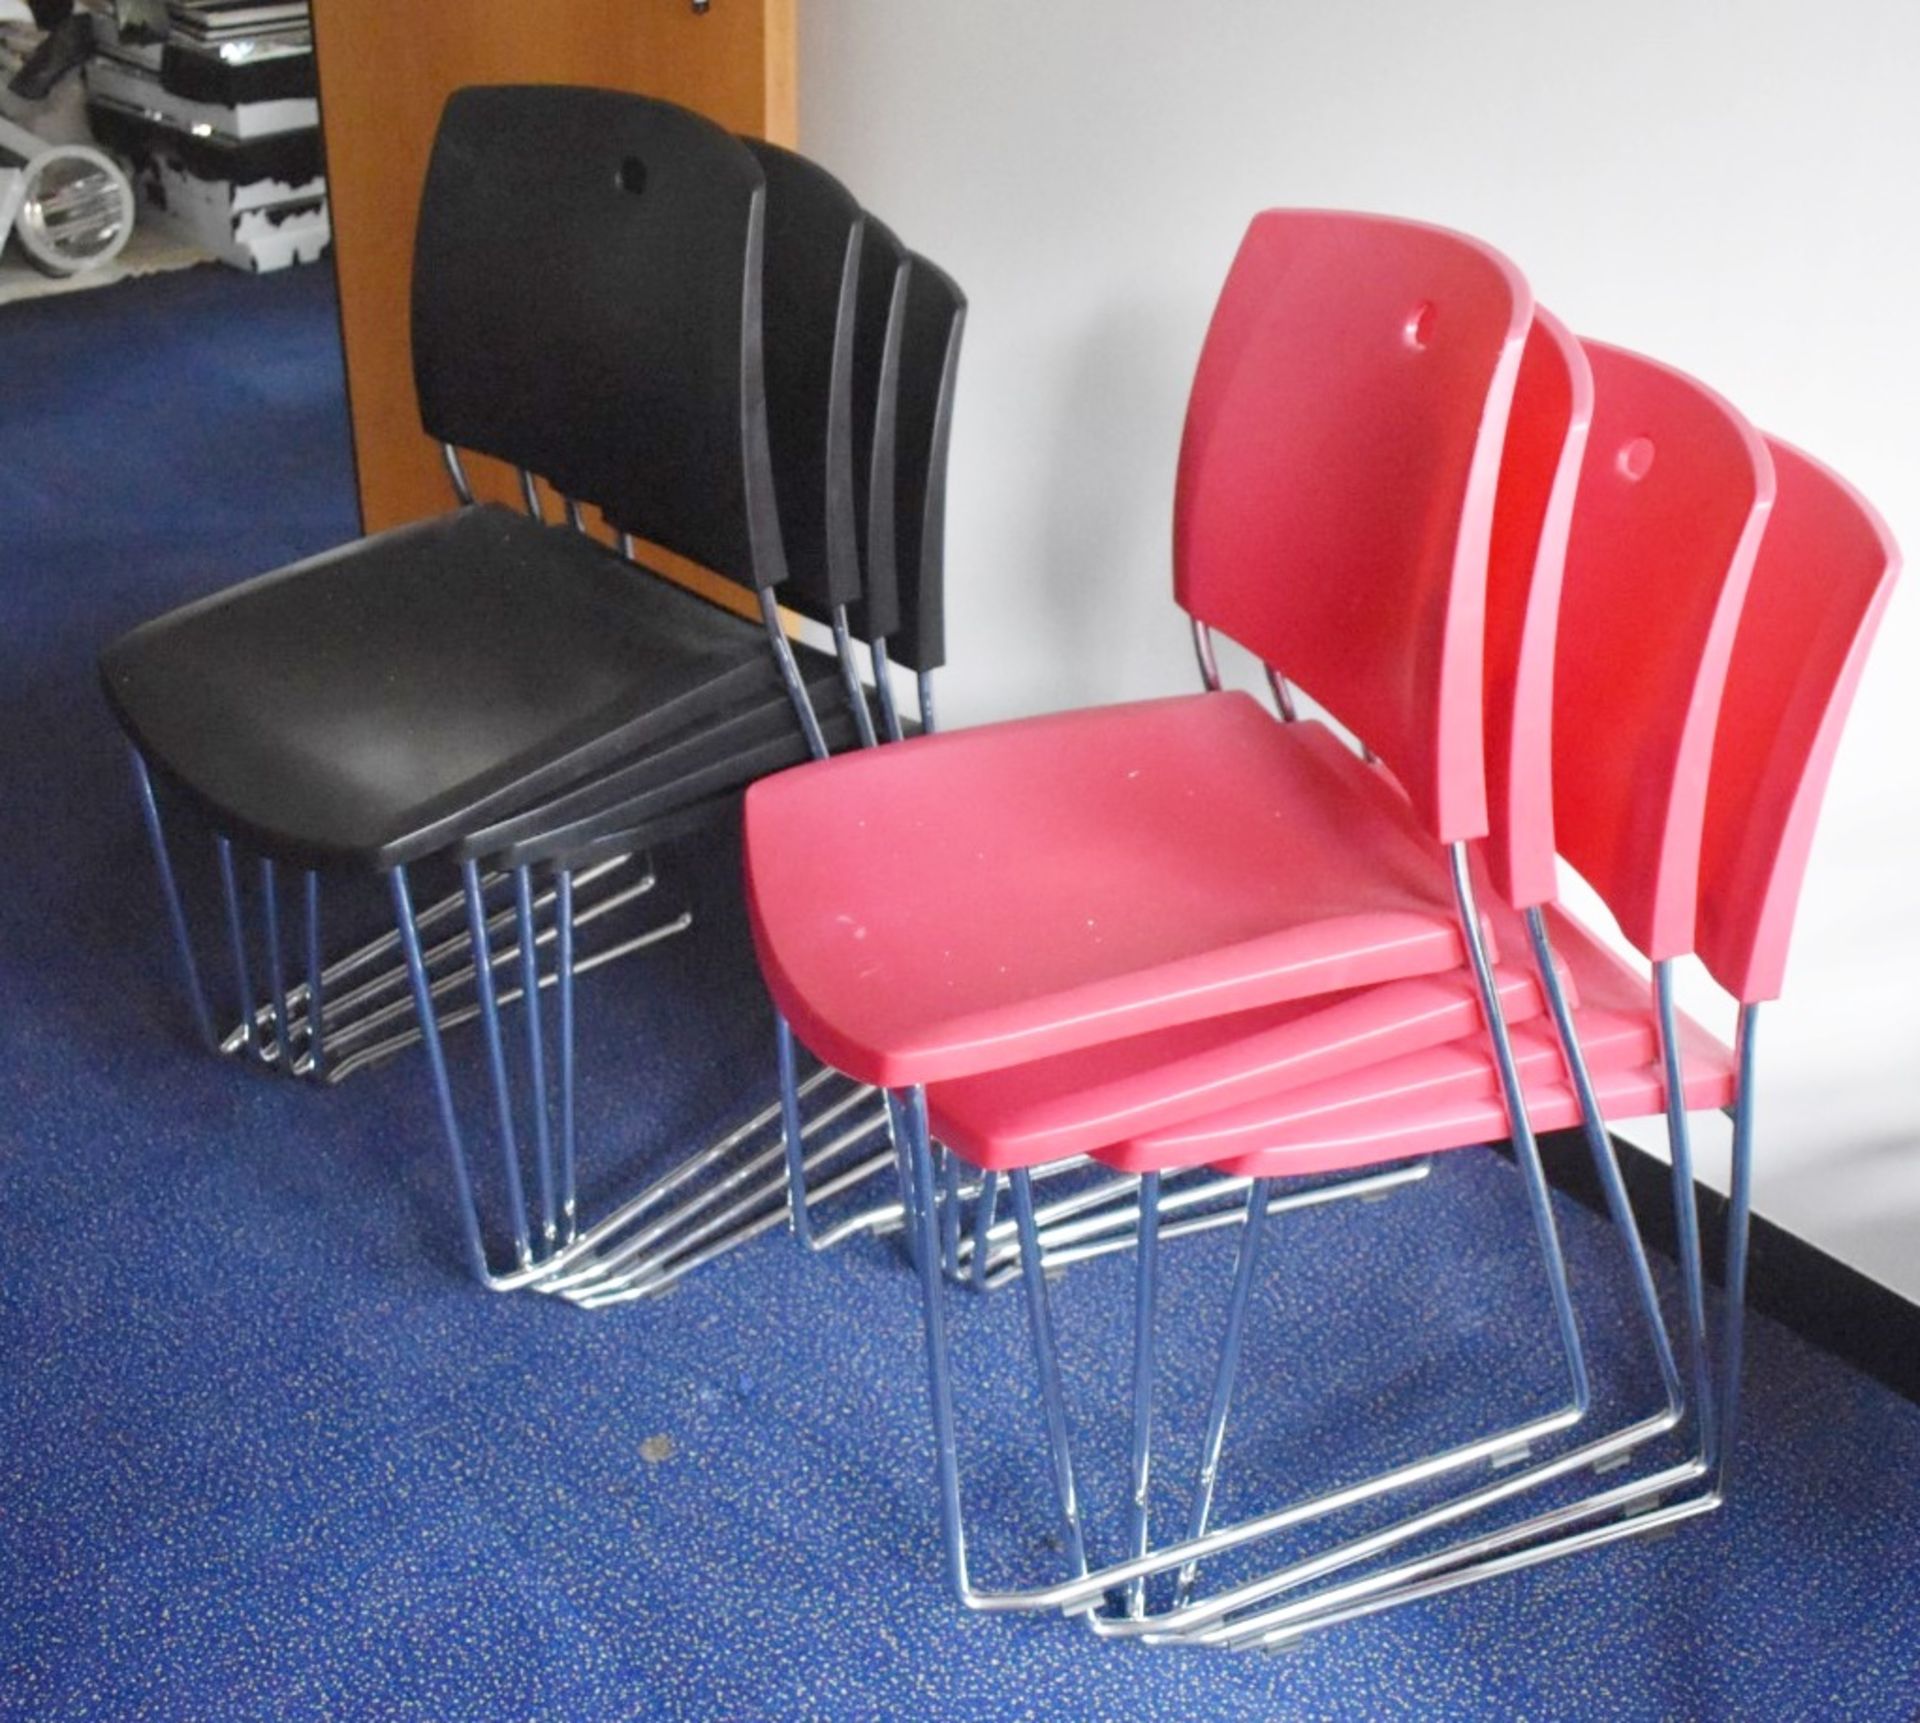 3 x Round Canteen Staff Room Tables in Beech With 8 x Plastic Chairs in Black and Red and 2 x Office - Image 3 of 5